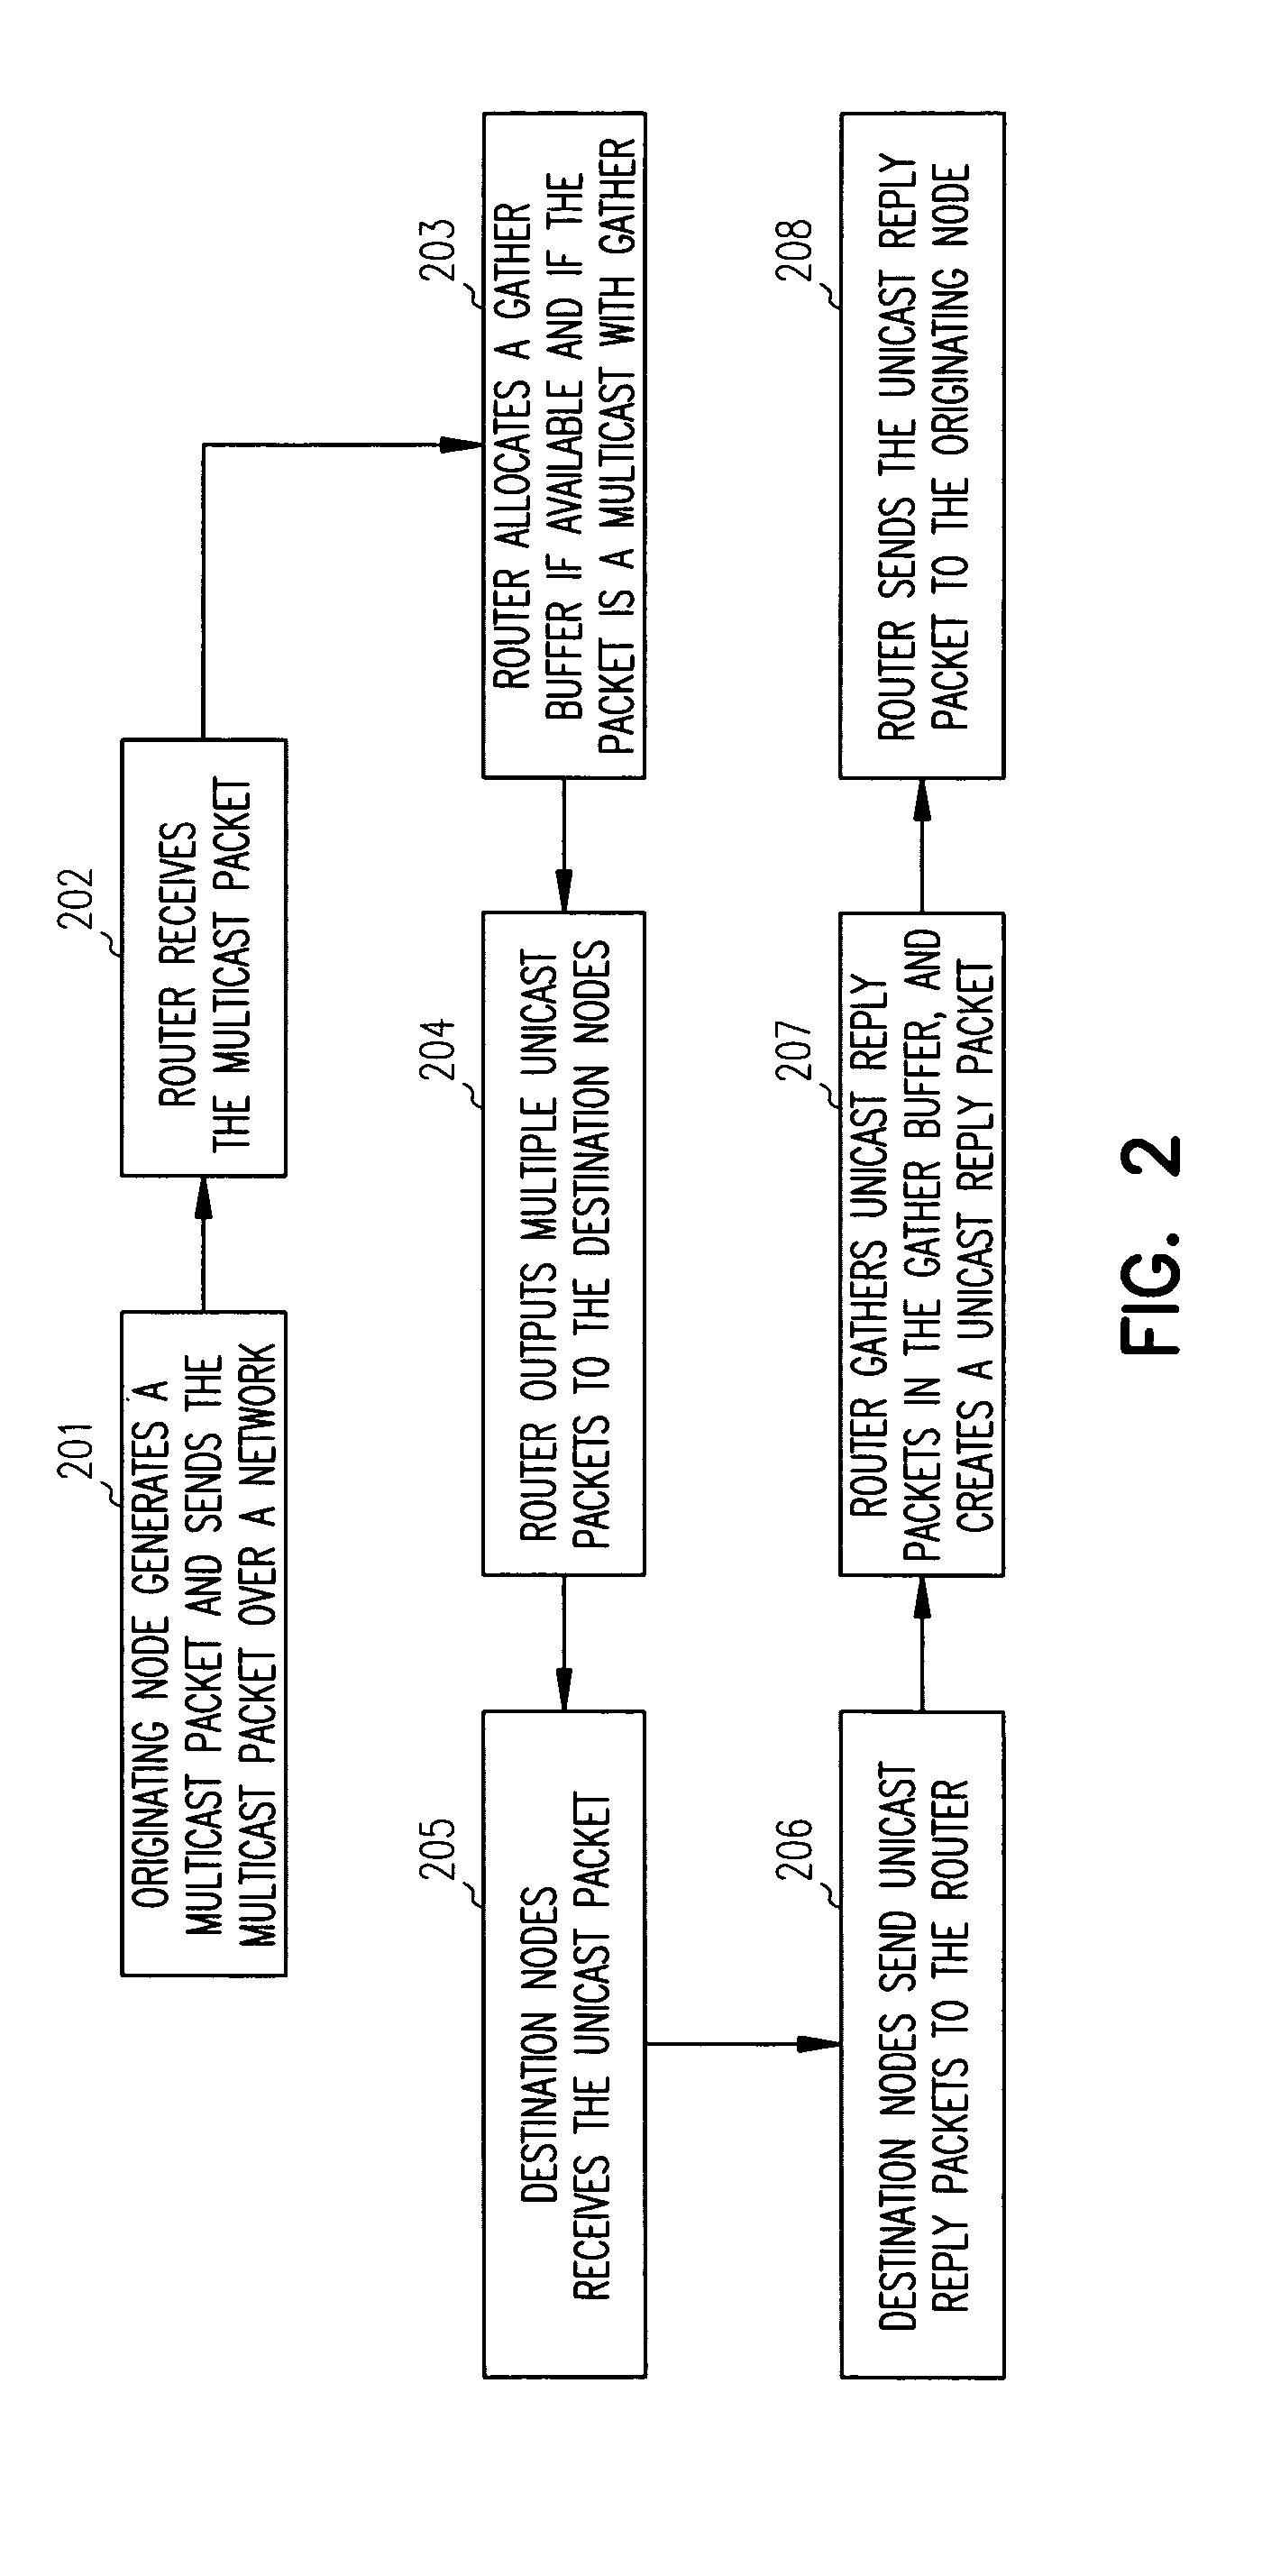 Multiprocessor network multicasting and gathering